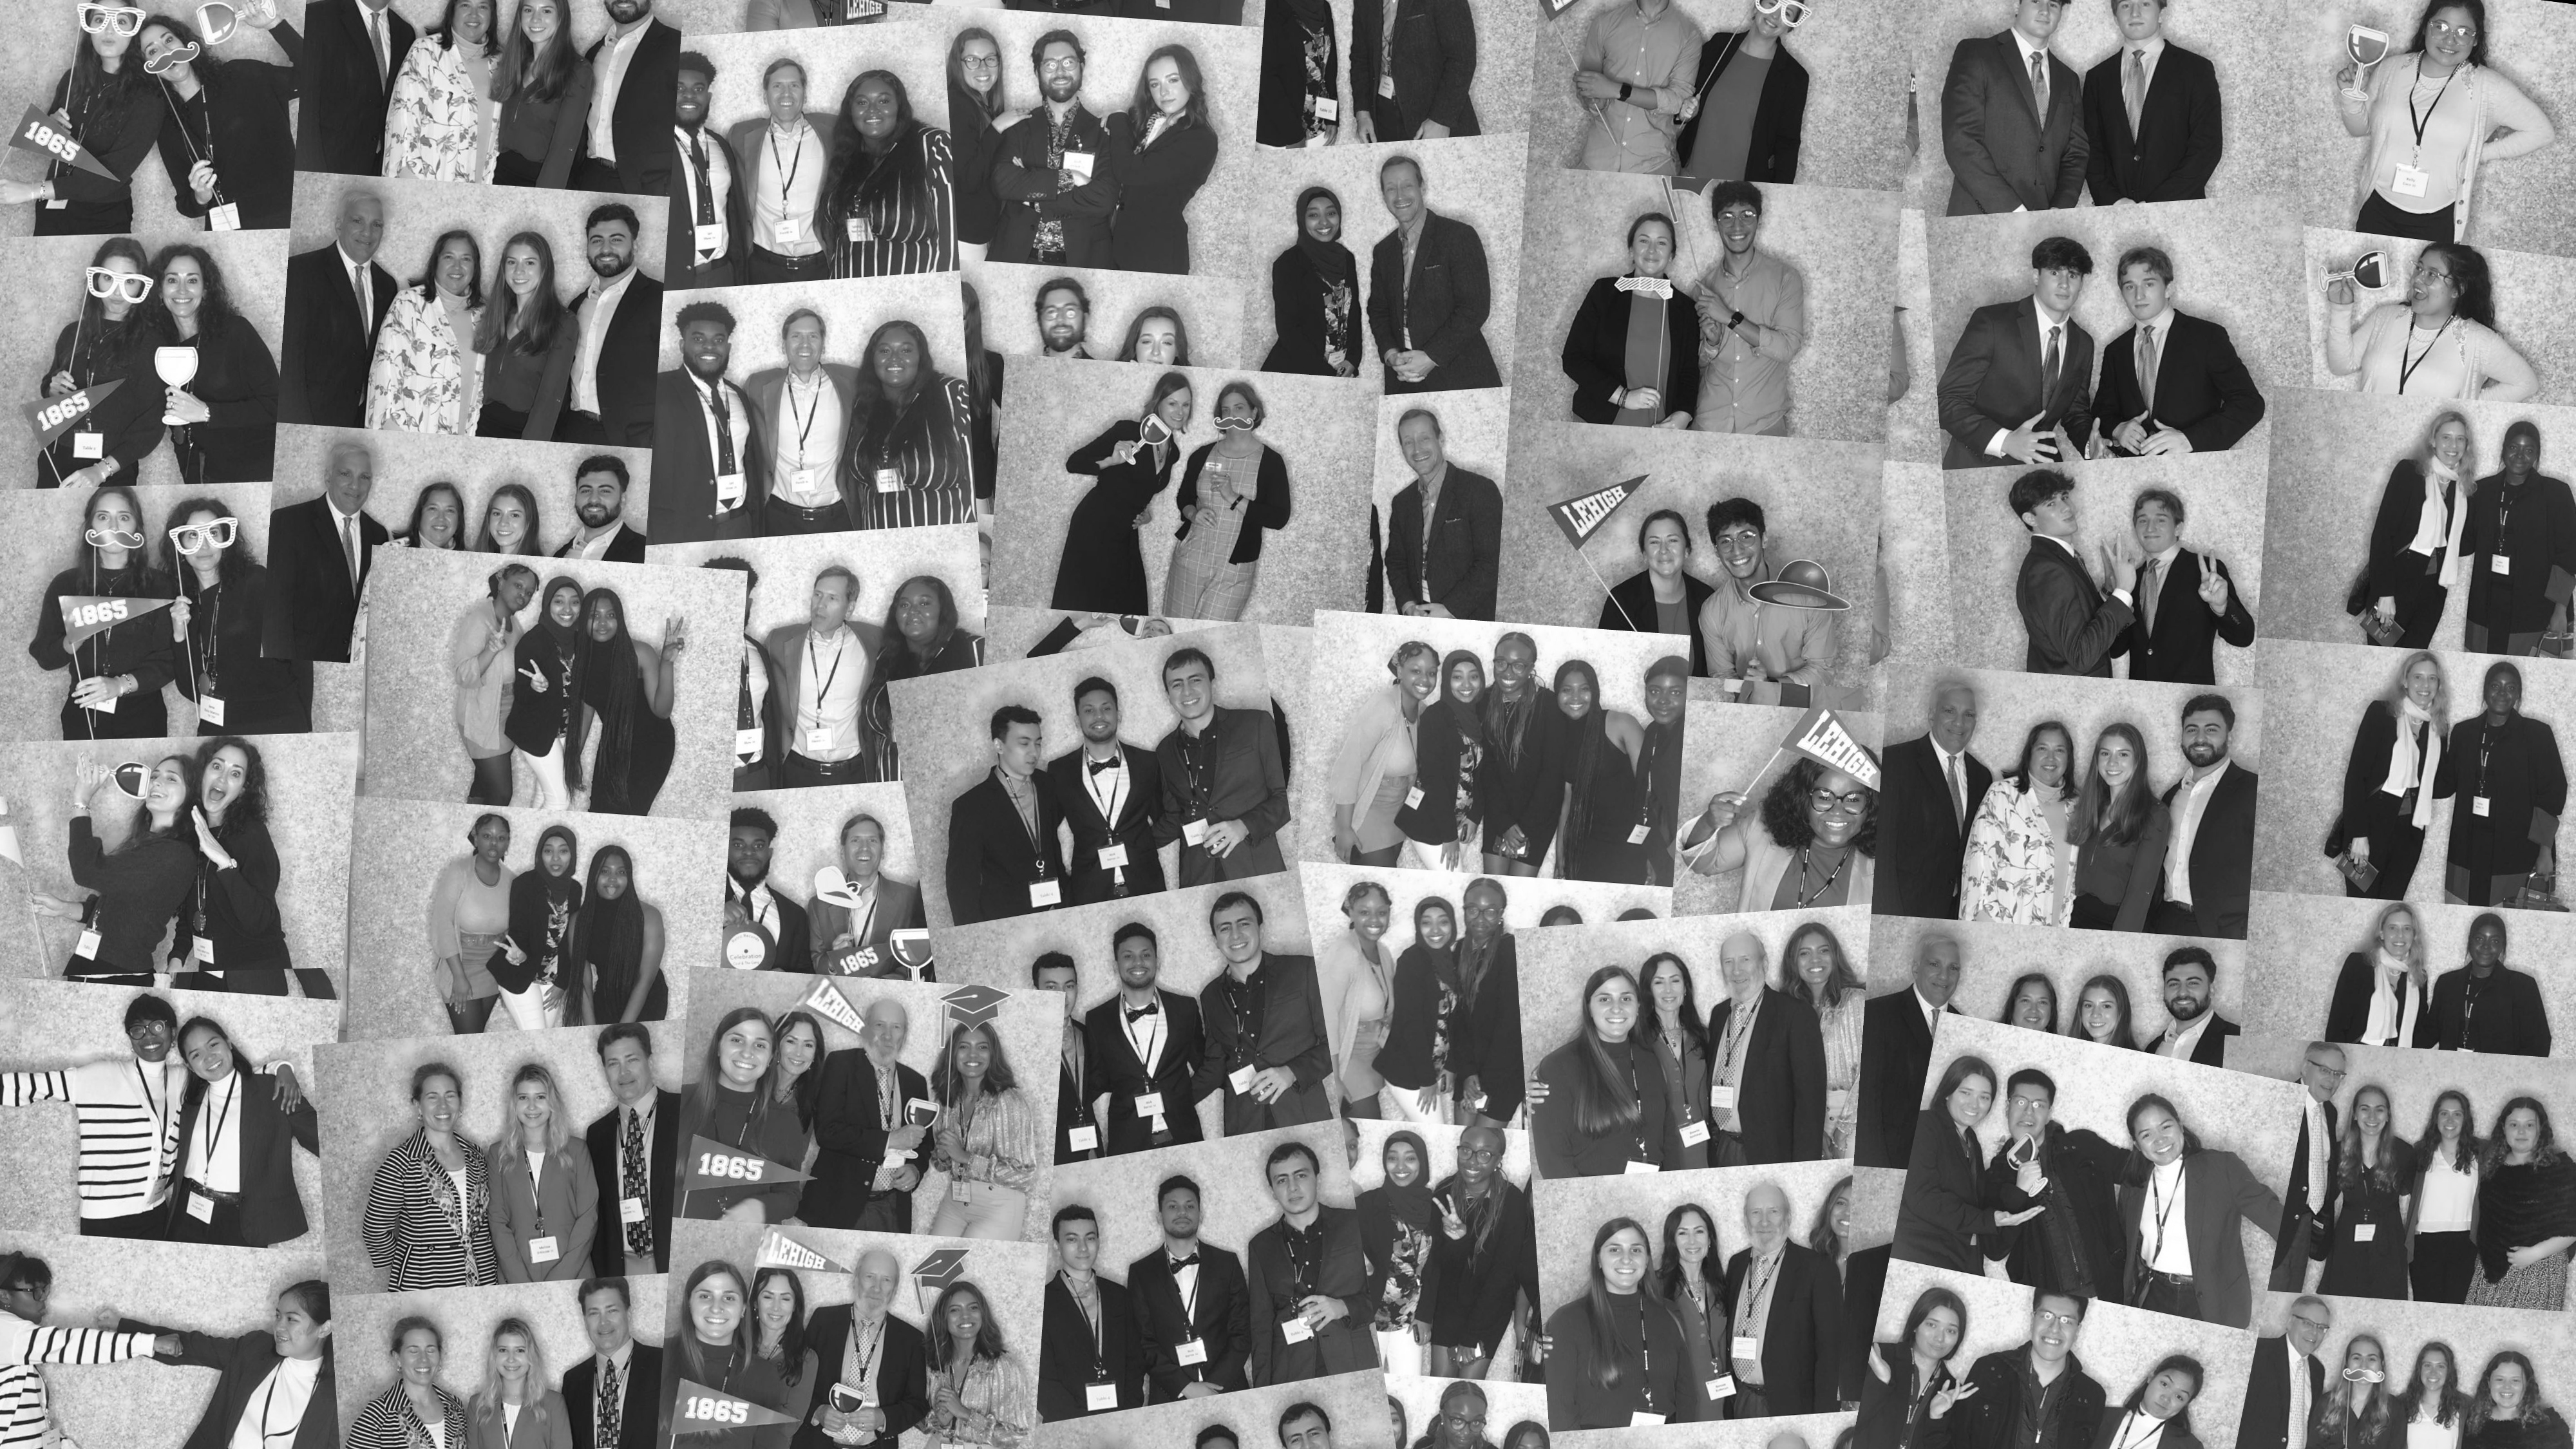 A collection of photo strips taken at the scholarship event